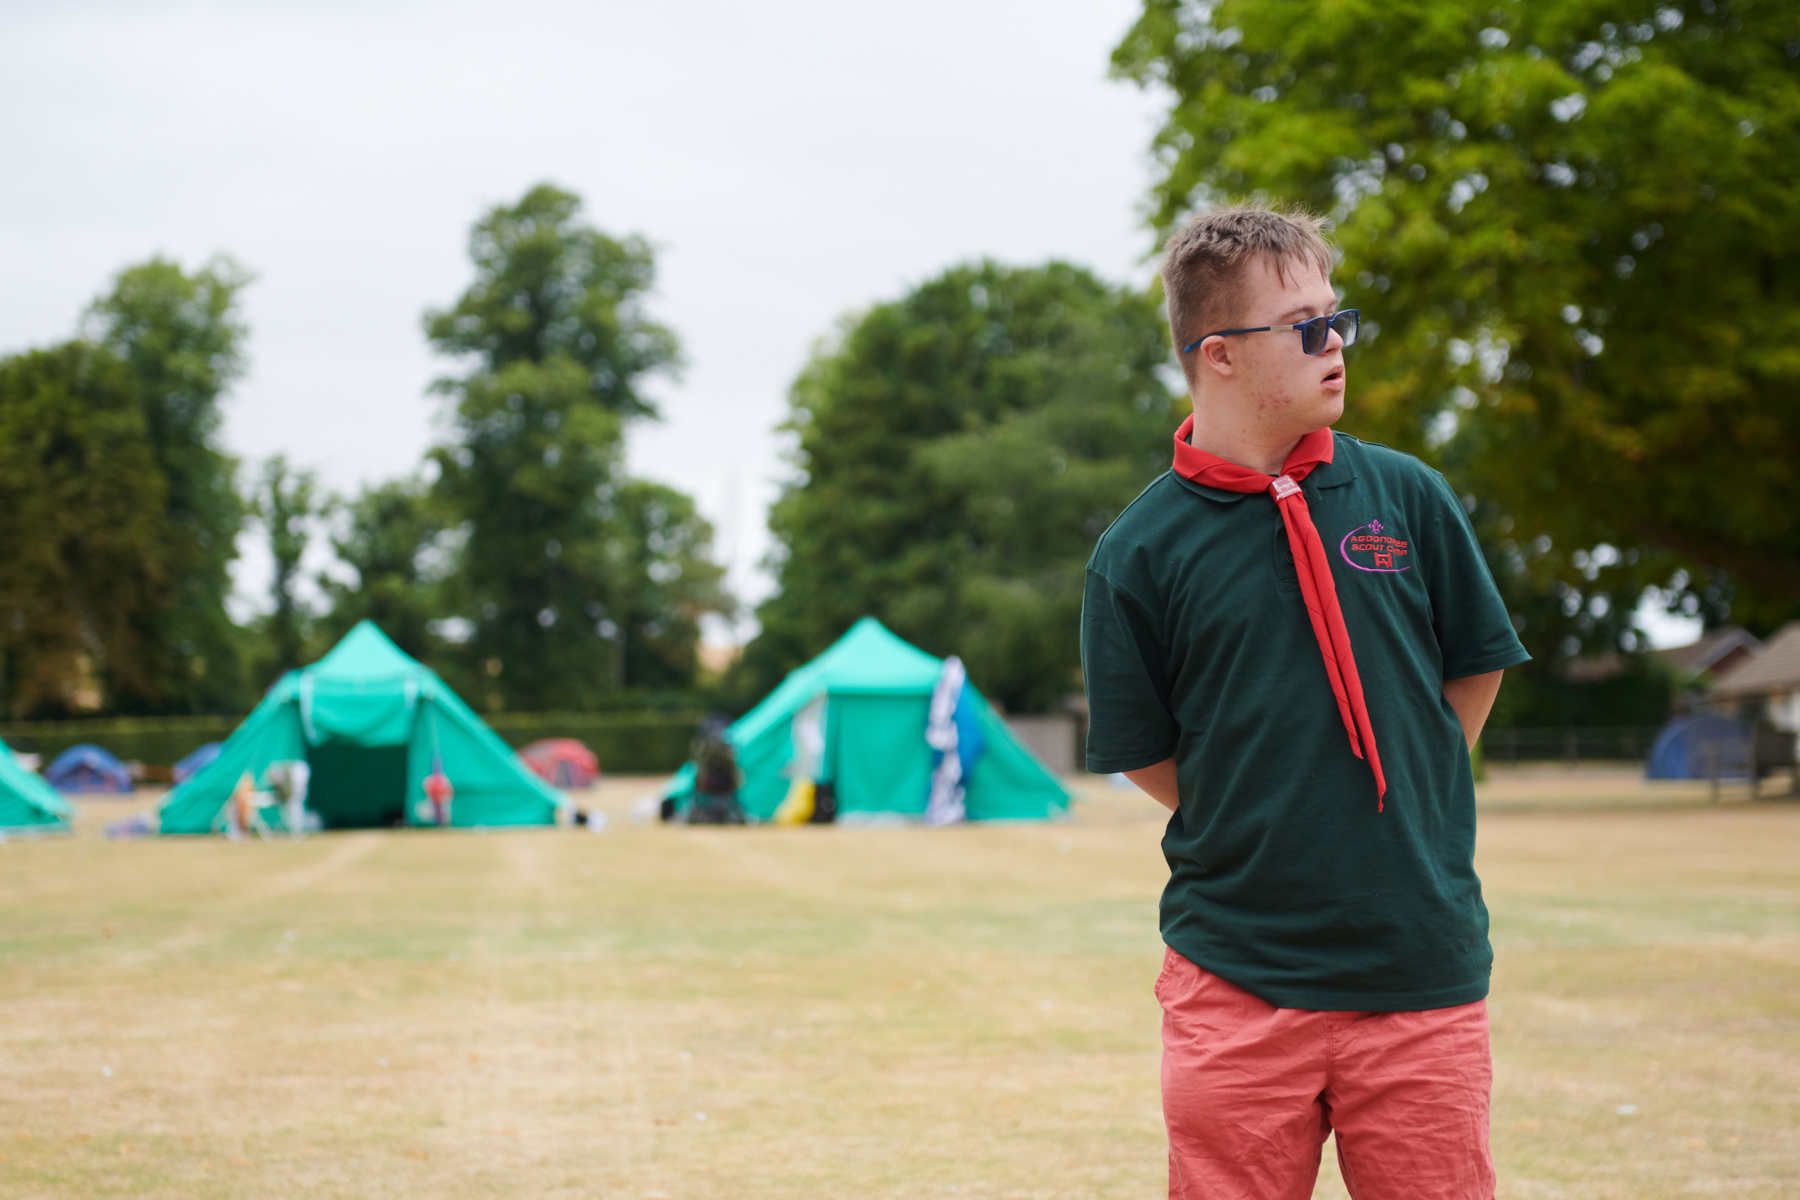 George is stood in a field on camp. There are tents and trees behind him. He's in a green Scouts top, red necker and sunglasses. He's looking over to the right.